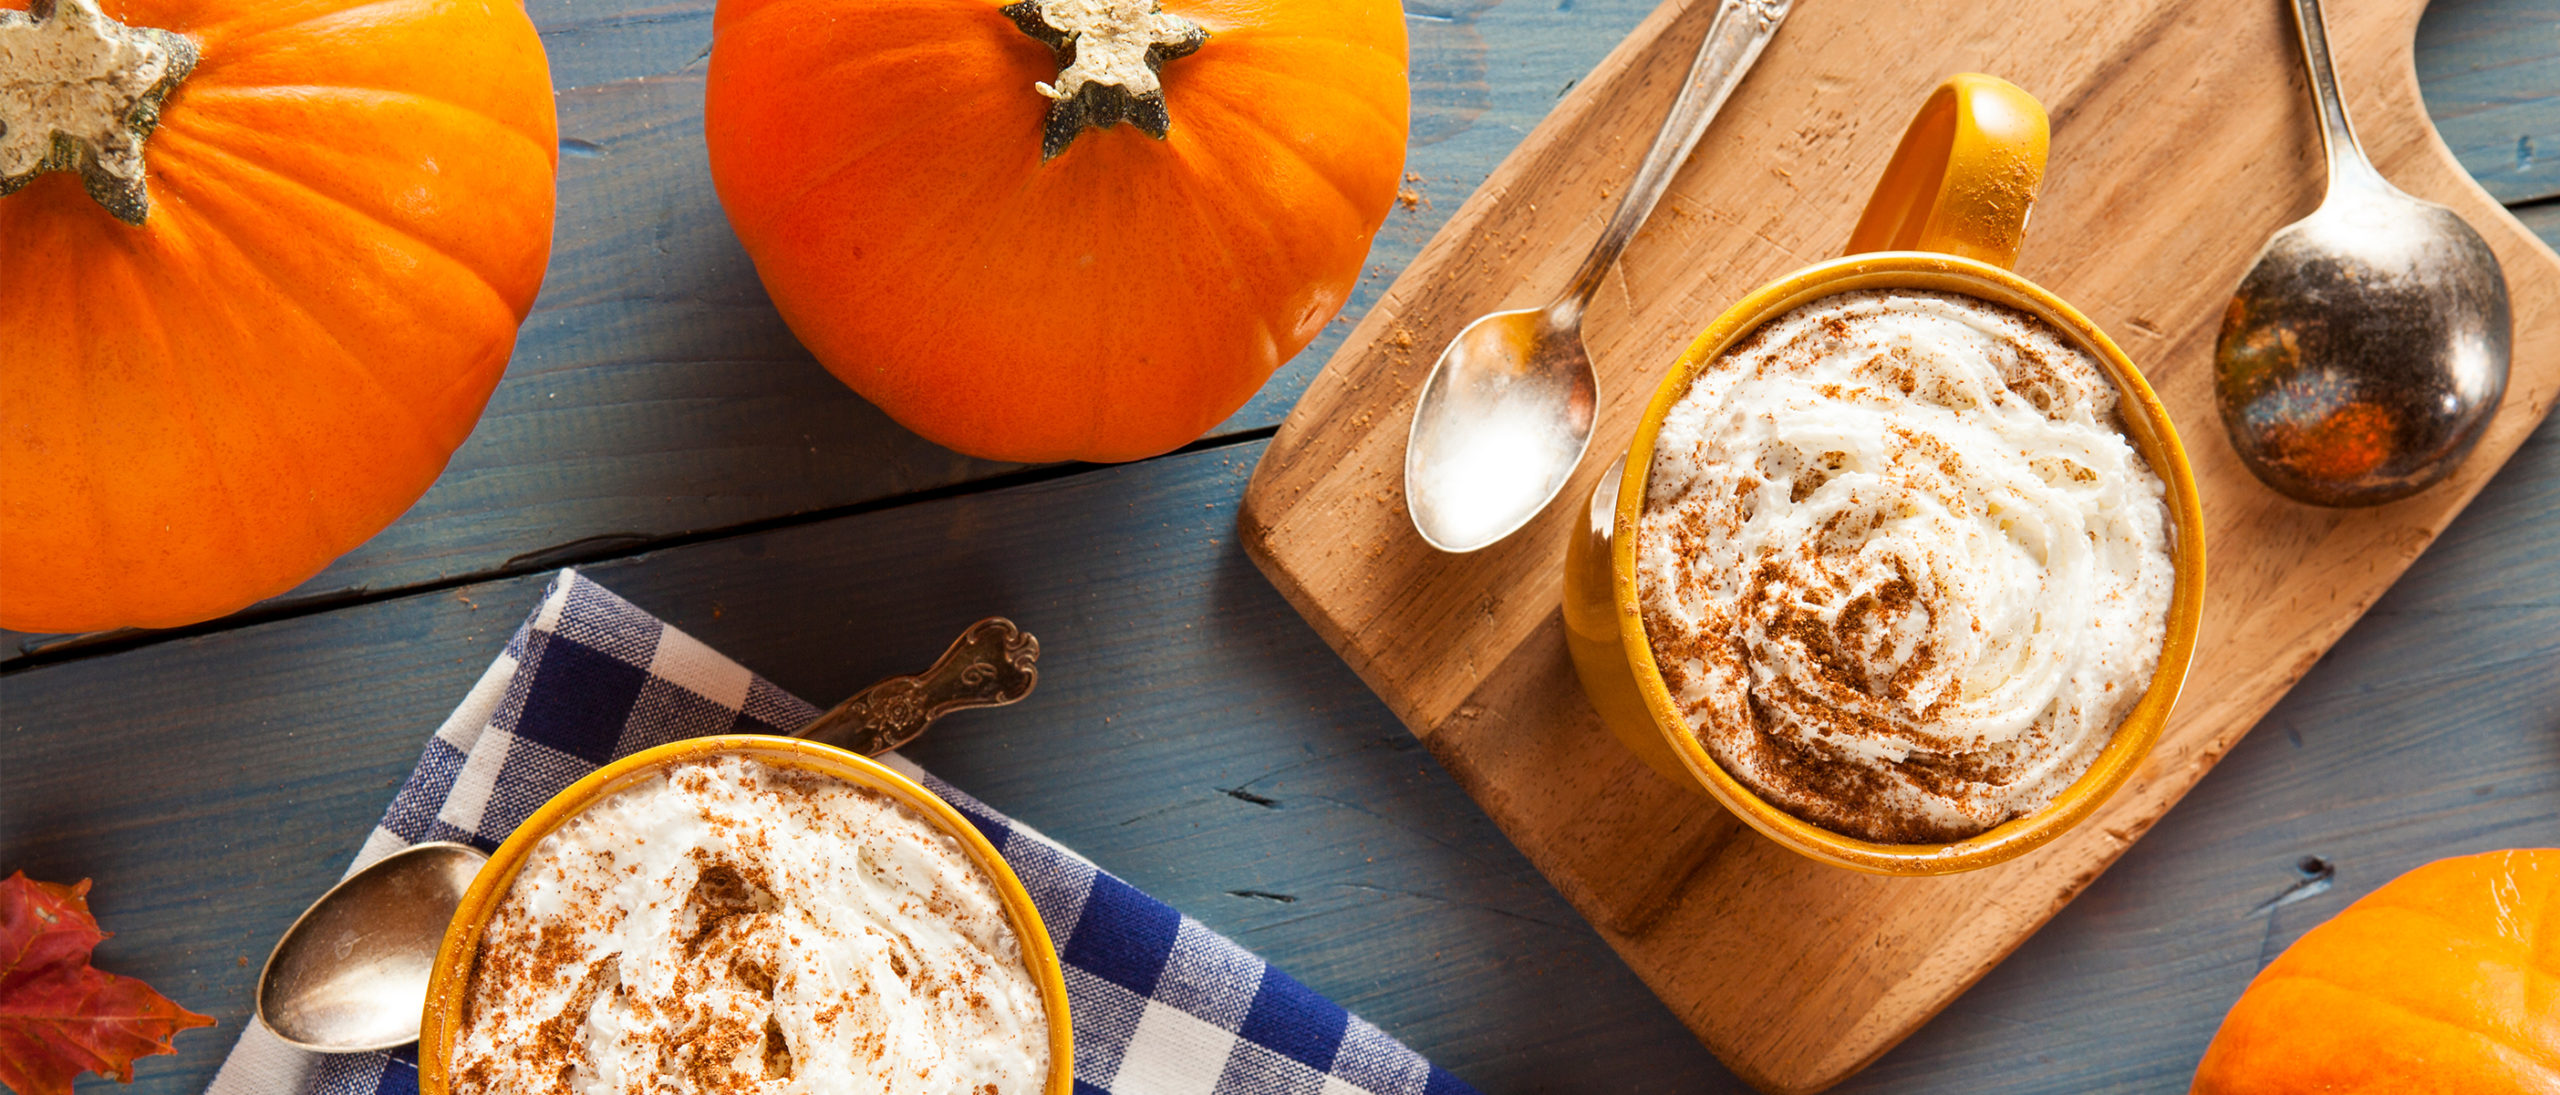 5 Fall Drinks to Get You Through the Season